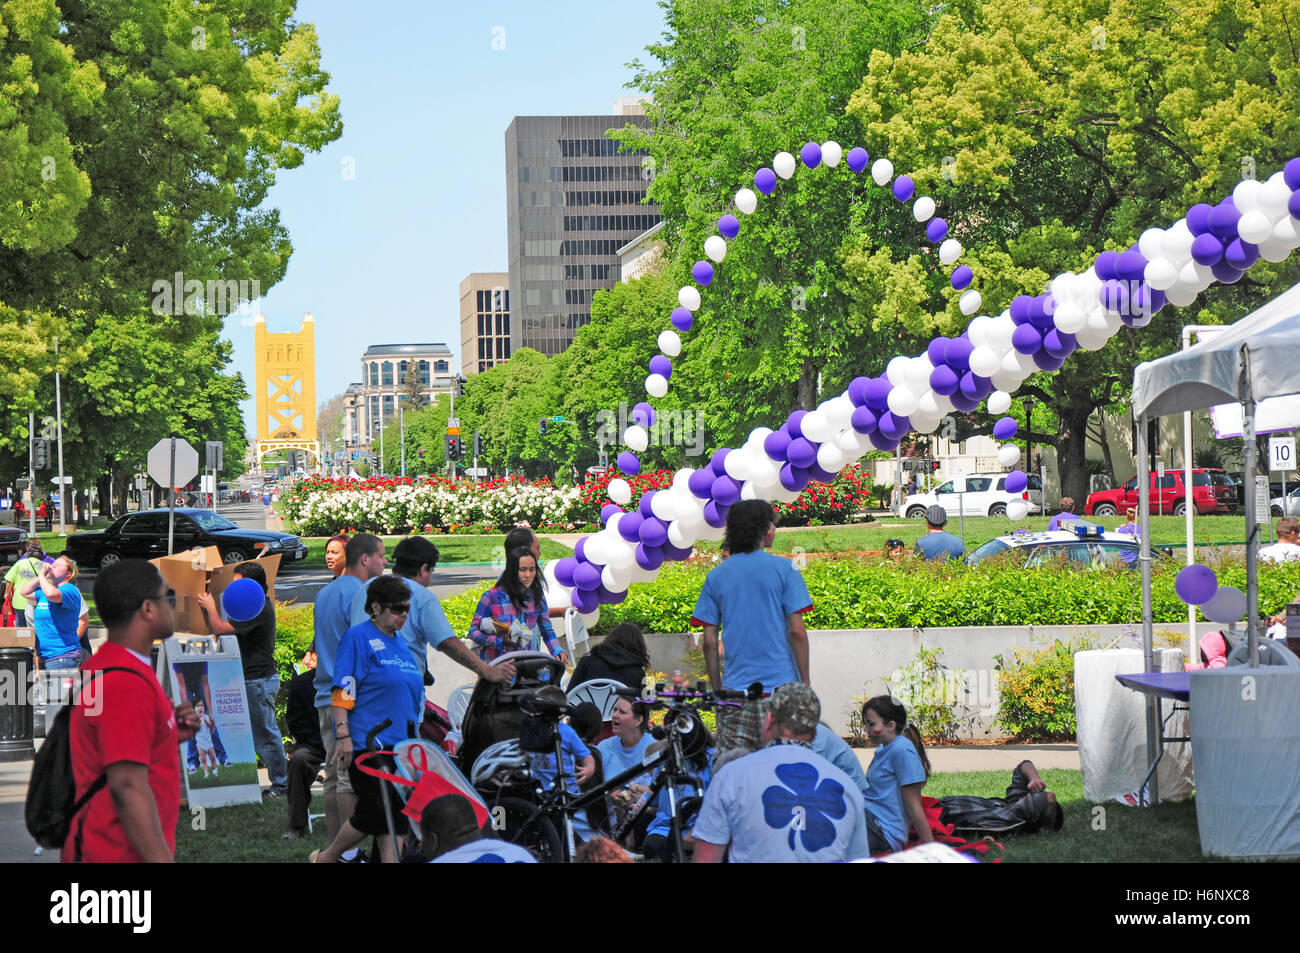 March of dimes event in midtown Sacramento at the California state capitol on the capital mall with the golden bridge. Stock Photo